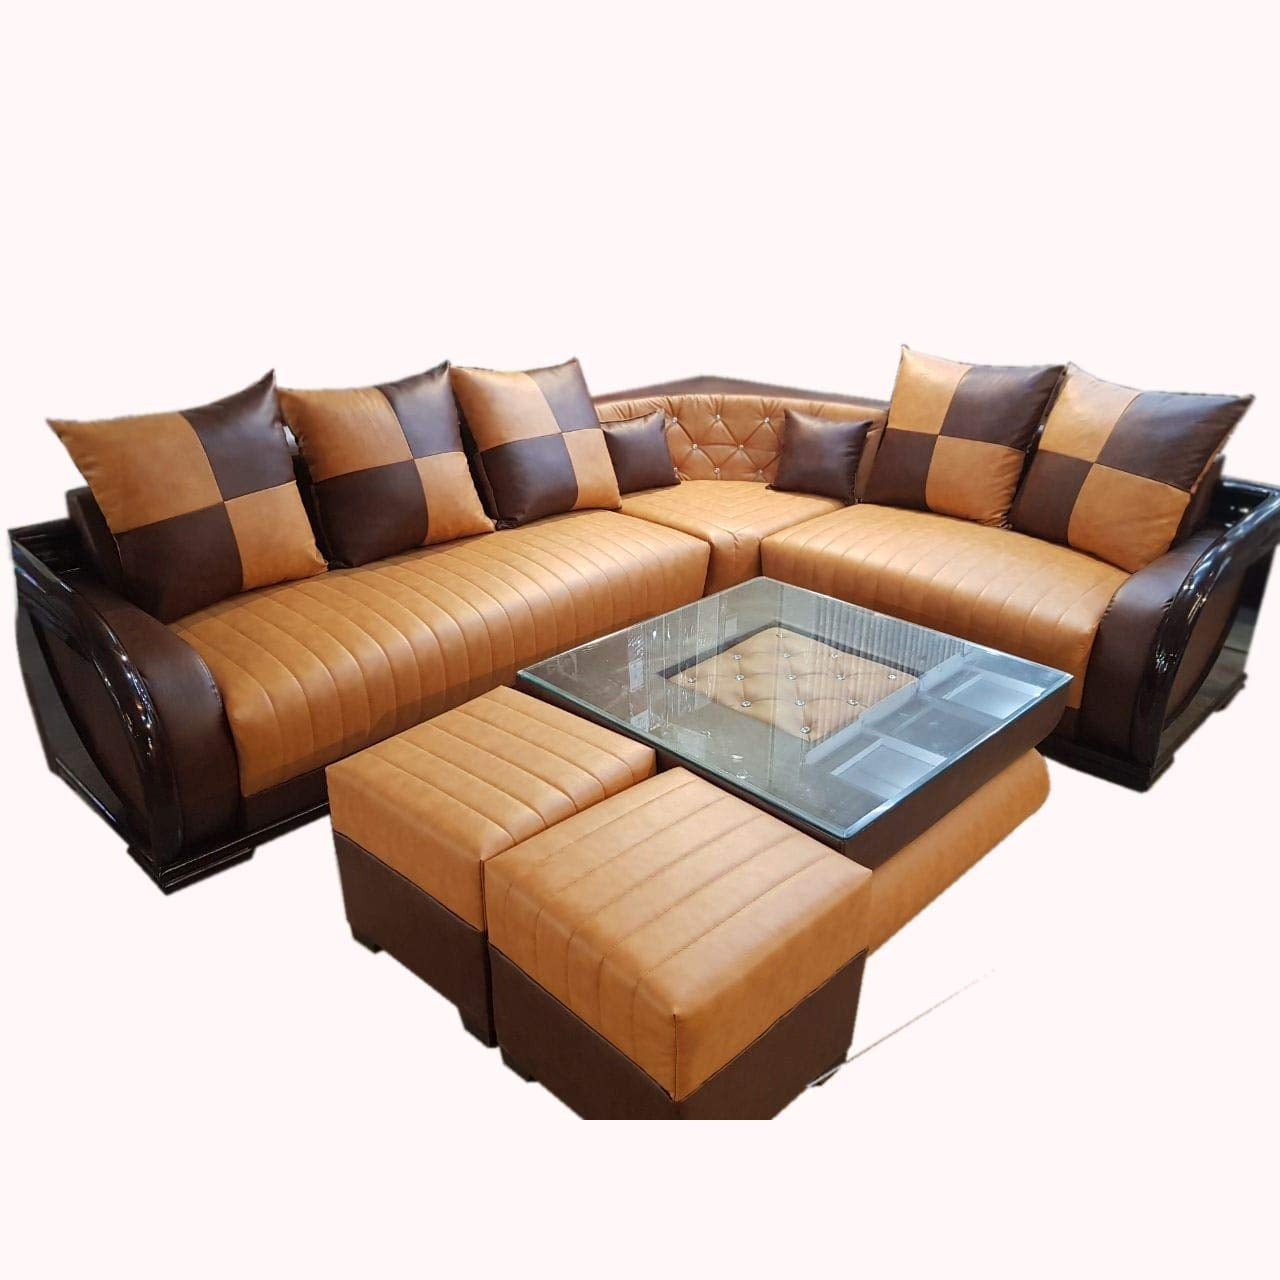 L Shape Sofa Set- Leatherette Sofa Set and 2 Puffy (Darksalmon and Brown)